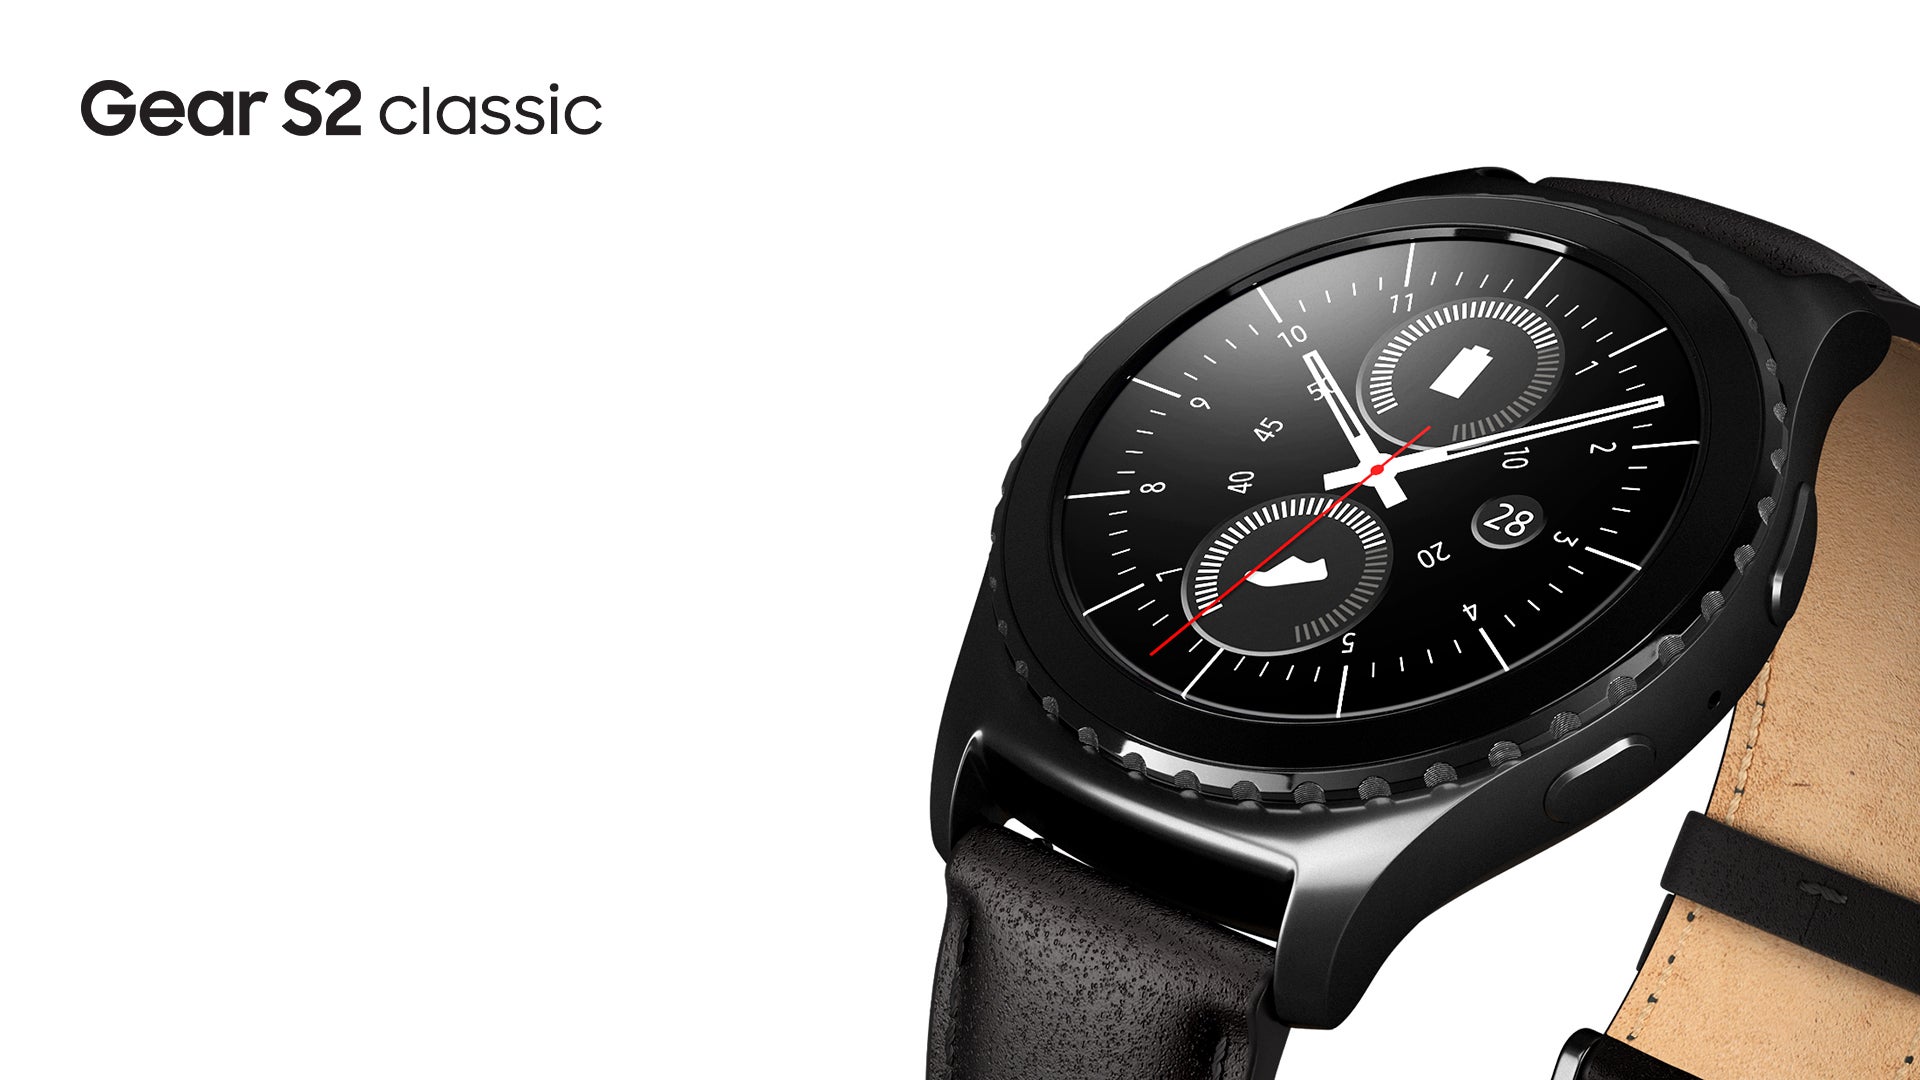 Deal: Want a great smartwatch? The stylish Samsung Gear S2 Classic has received its biggest discount to date!